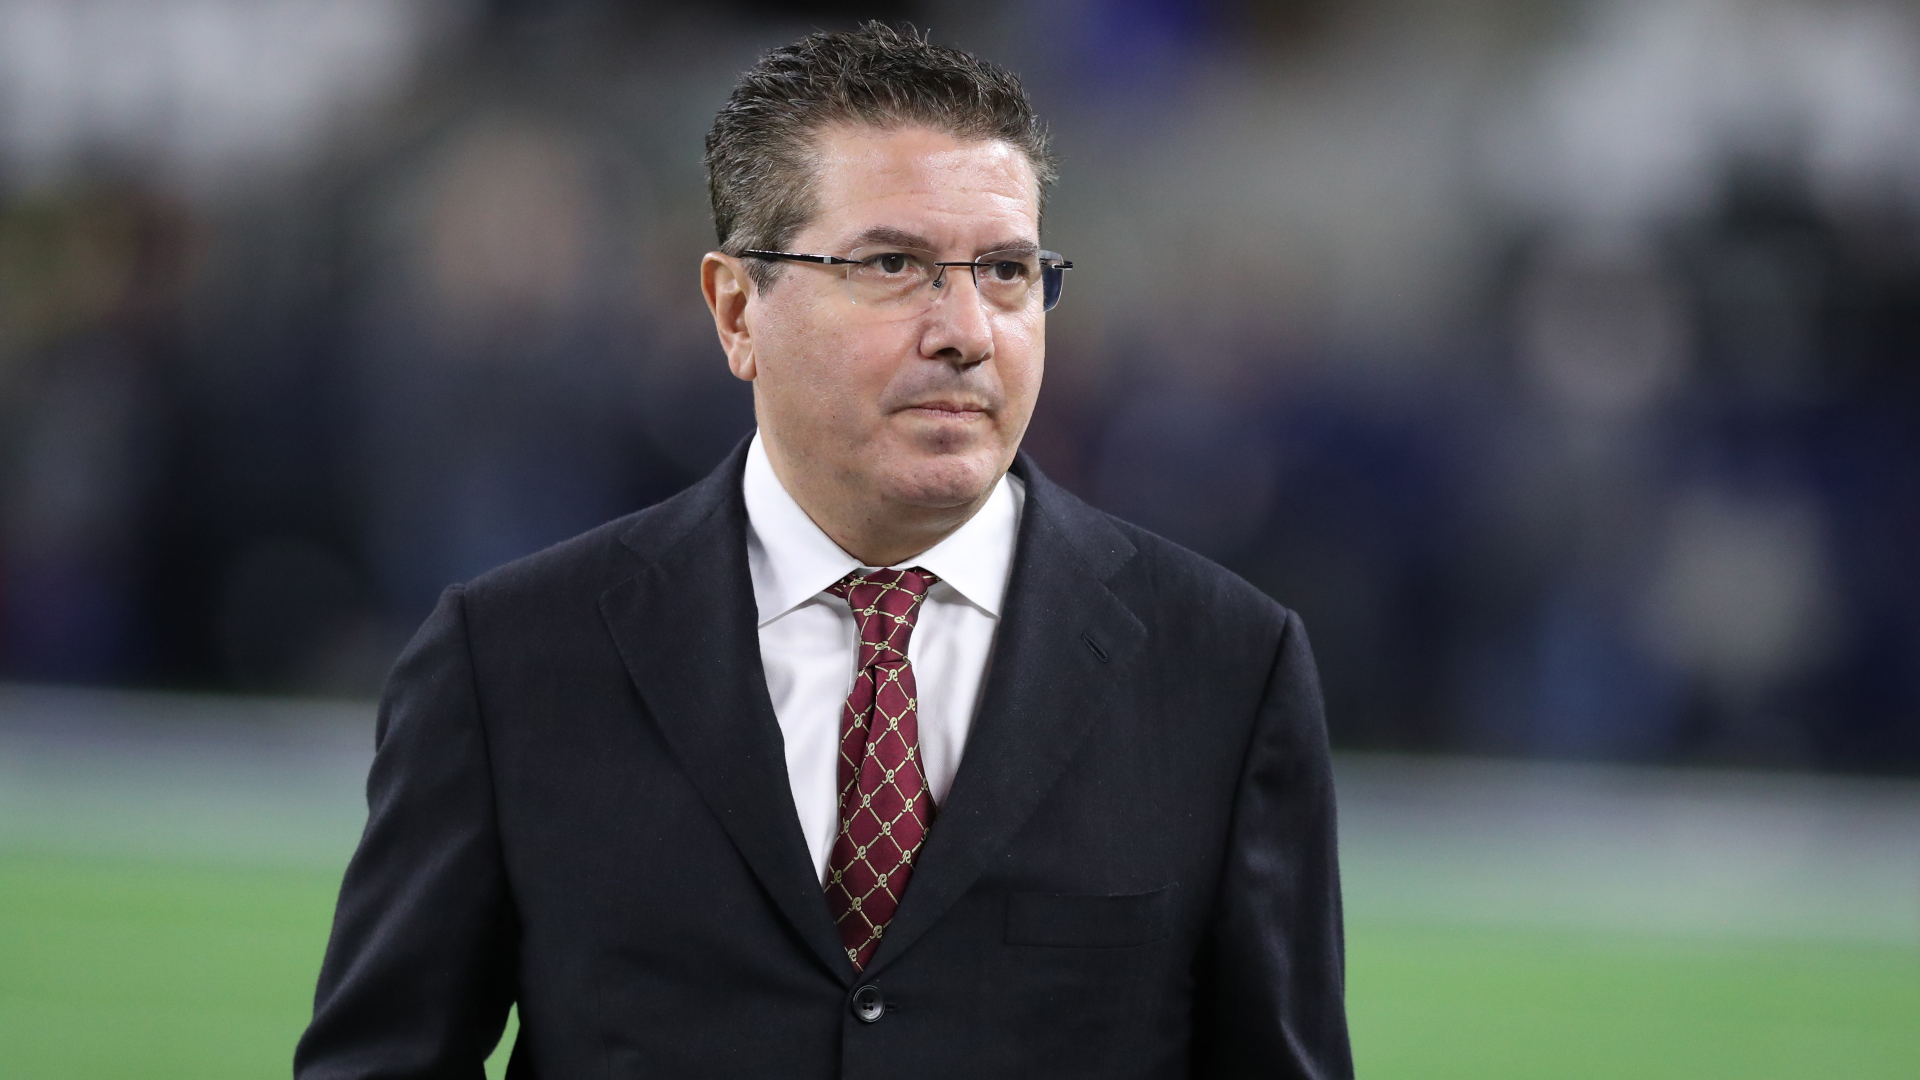 NFL Hires Attorney Mary Jo White to Investigate Commanders' Owner Dan Snyder